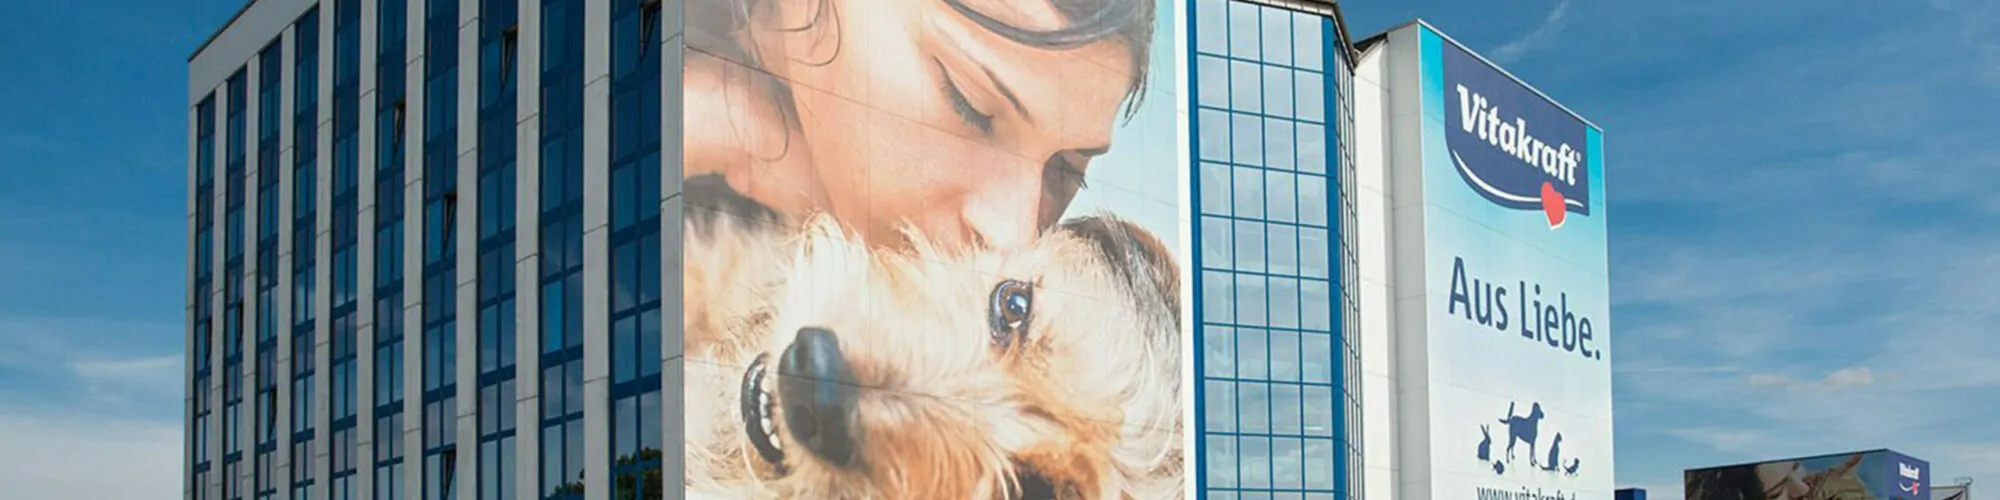 Picture of the Vitakraft company building with a poster of a woman kissing her dog, valantic Case Study Vitakraft